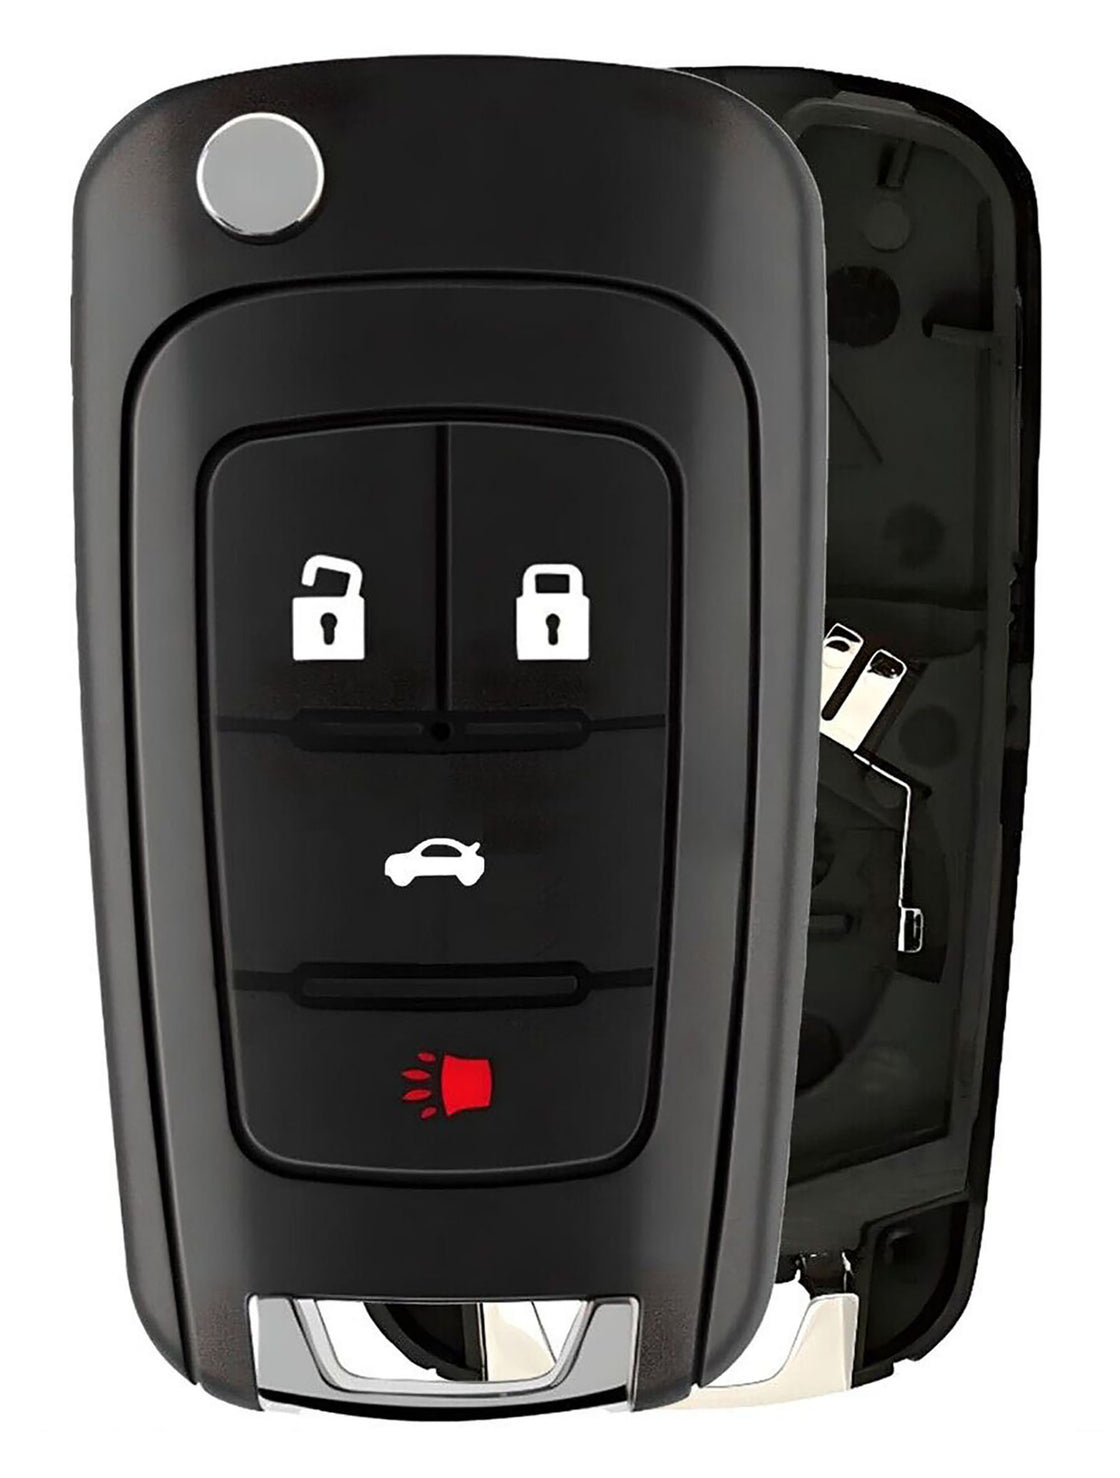 1x New Quality Replacement Key Fob Remote SHELL / CASE Compatible with & Fit For Buick & Chevrolet - MPN KR55WK50073-08 (NO electronics or Chip inside)